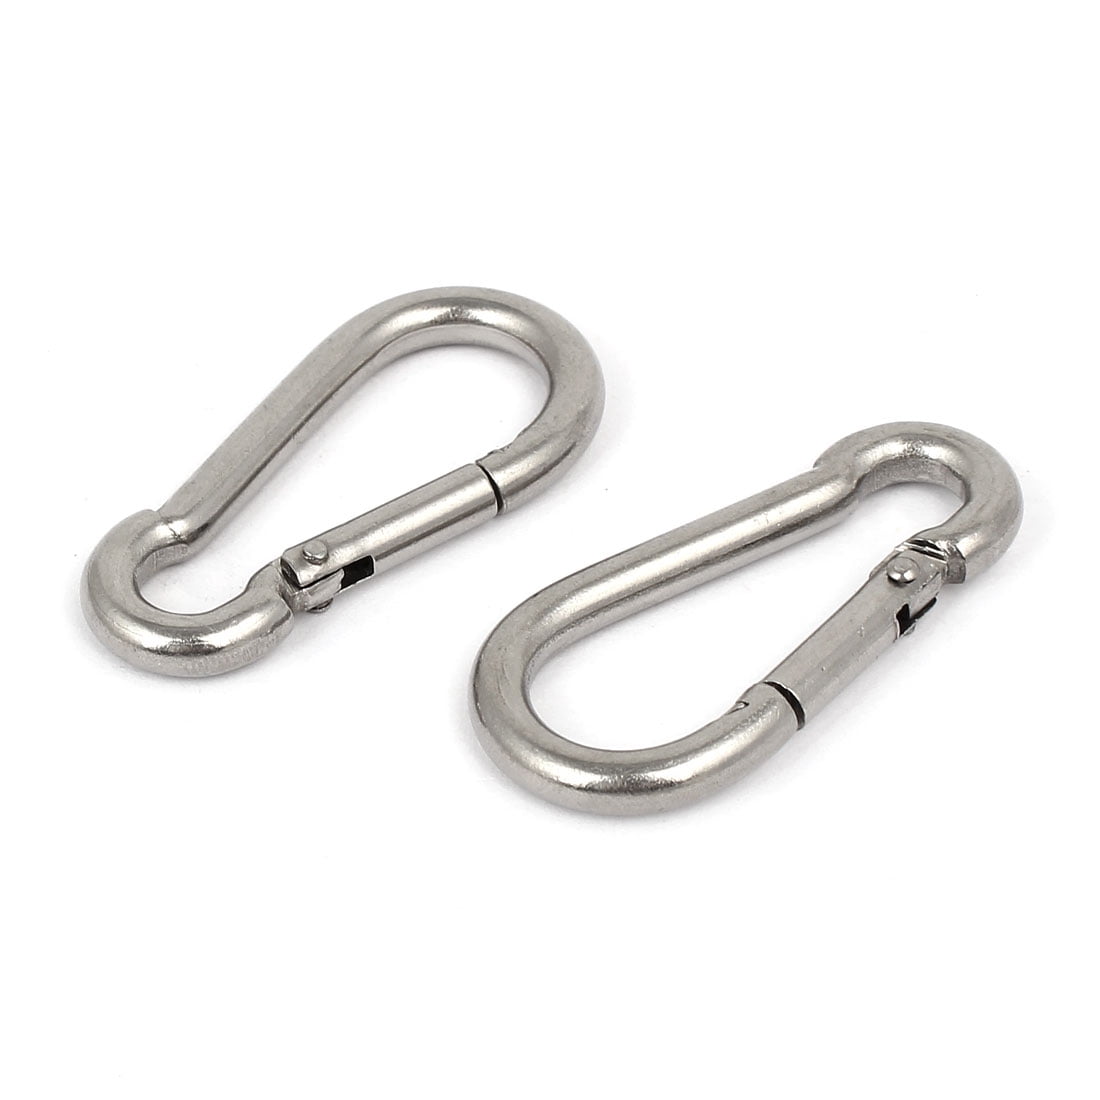 STAINLESS STEEL Carabiner Clips ~ 5mm x 50mm ~ Small SNAP HOOKS Keychain ~ 90kg 